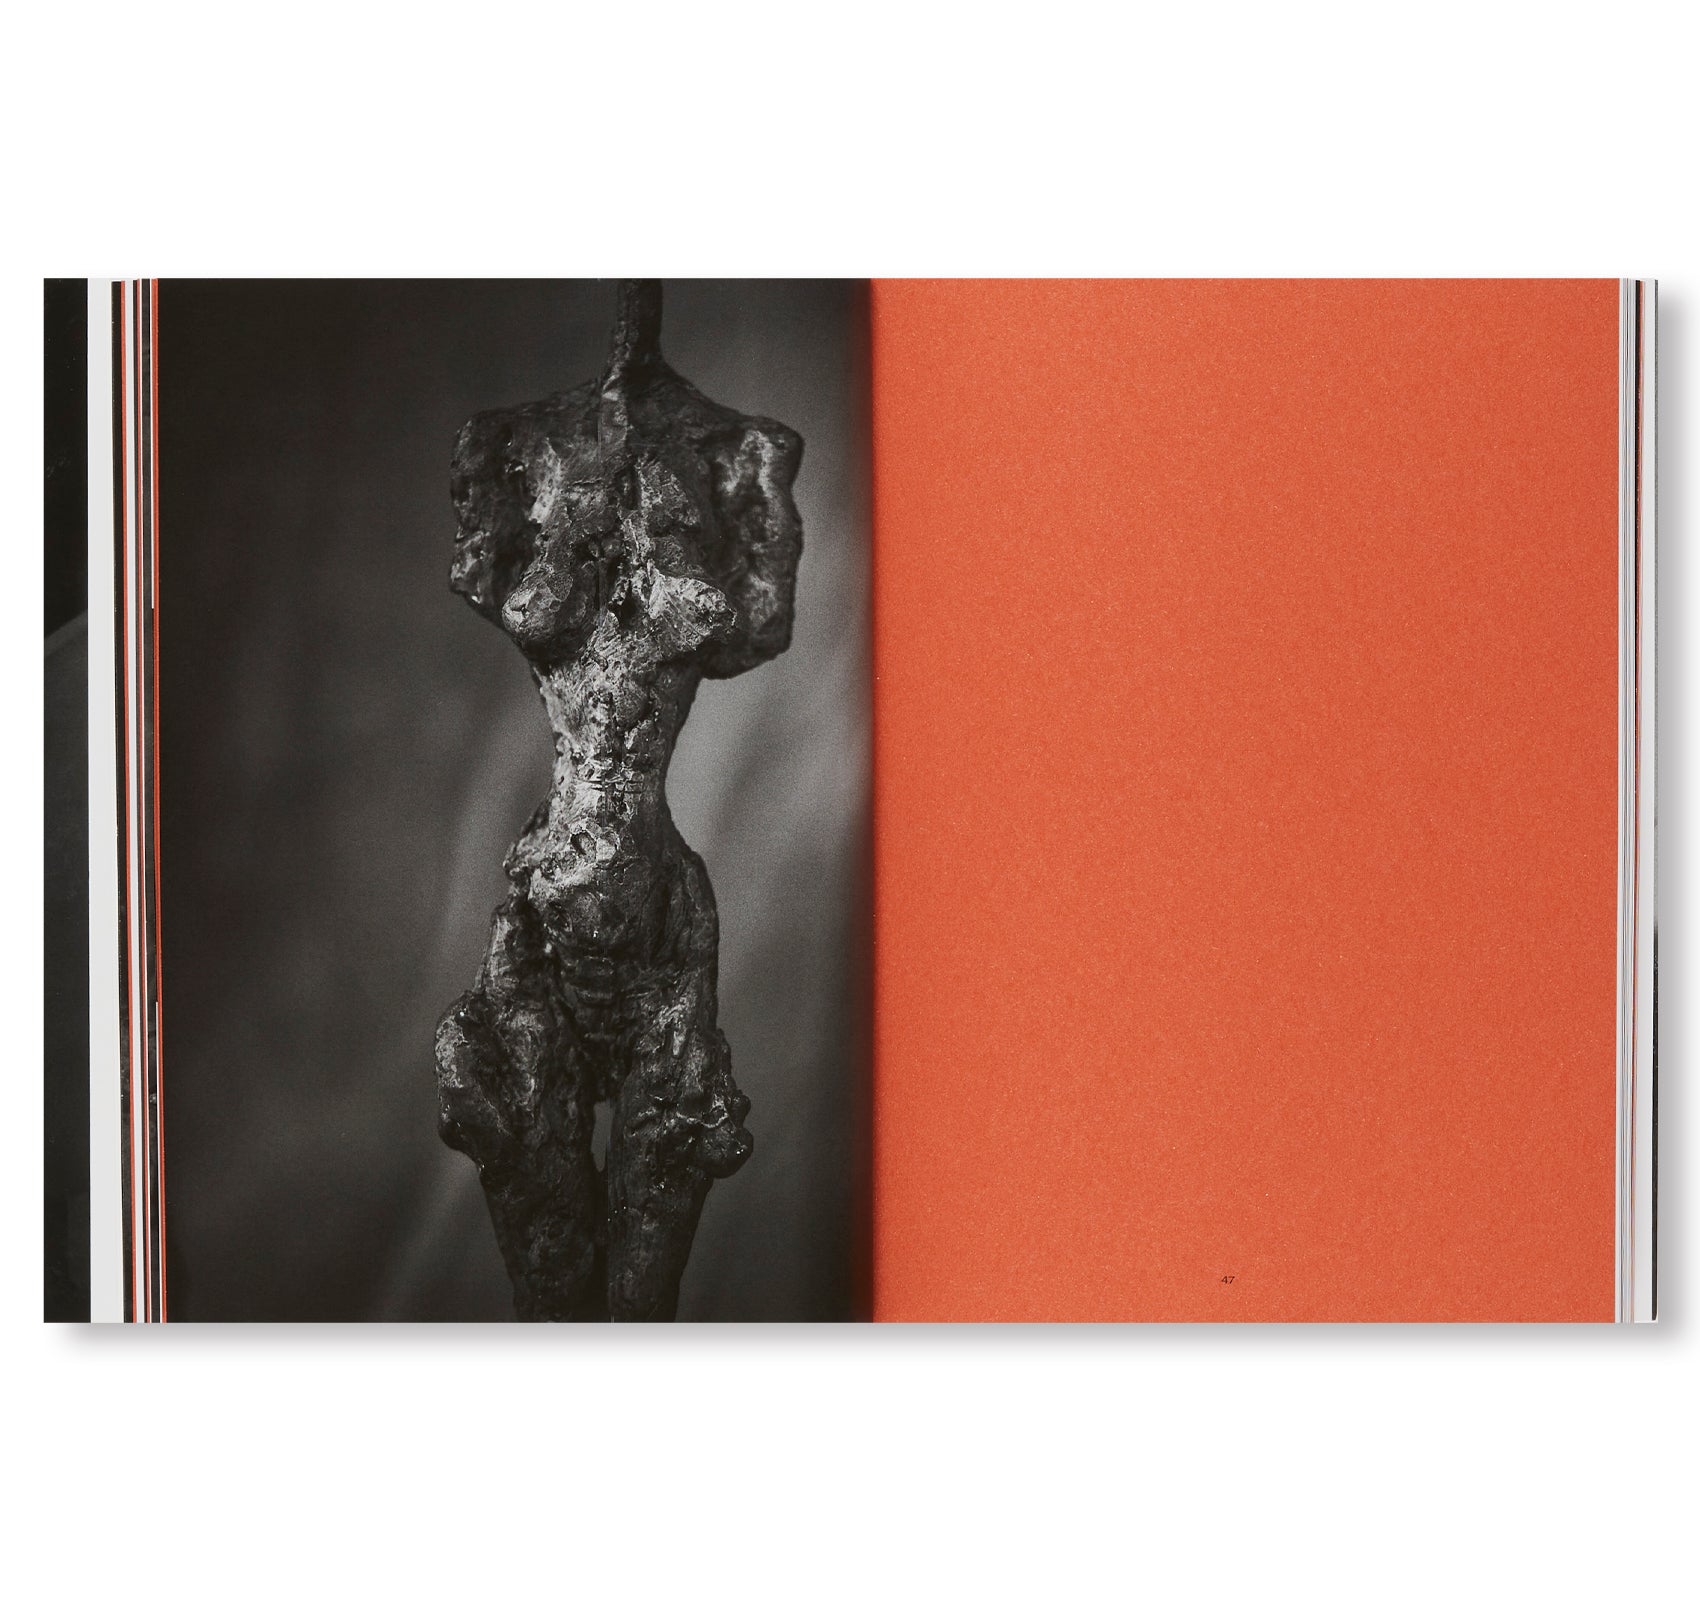 SUBSTANCE AND SHADOW: ALBERTO GIACOMETTI SCULPTURES AND THEIR PHOTOGRAPHS BY PETER LINDBERGH by Peter Lindbergh